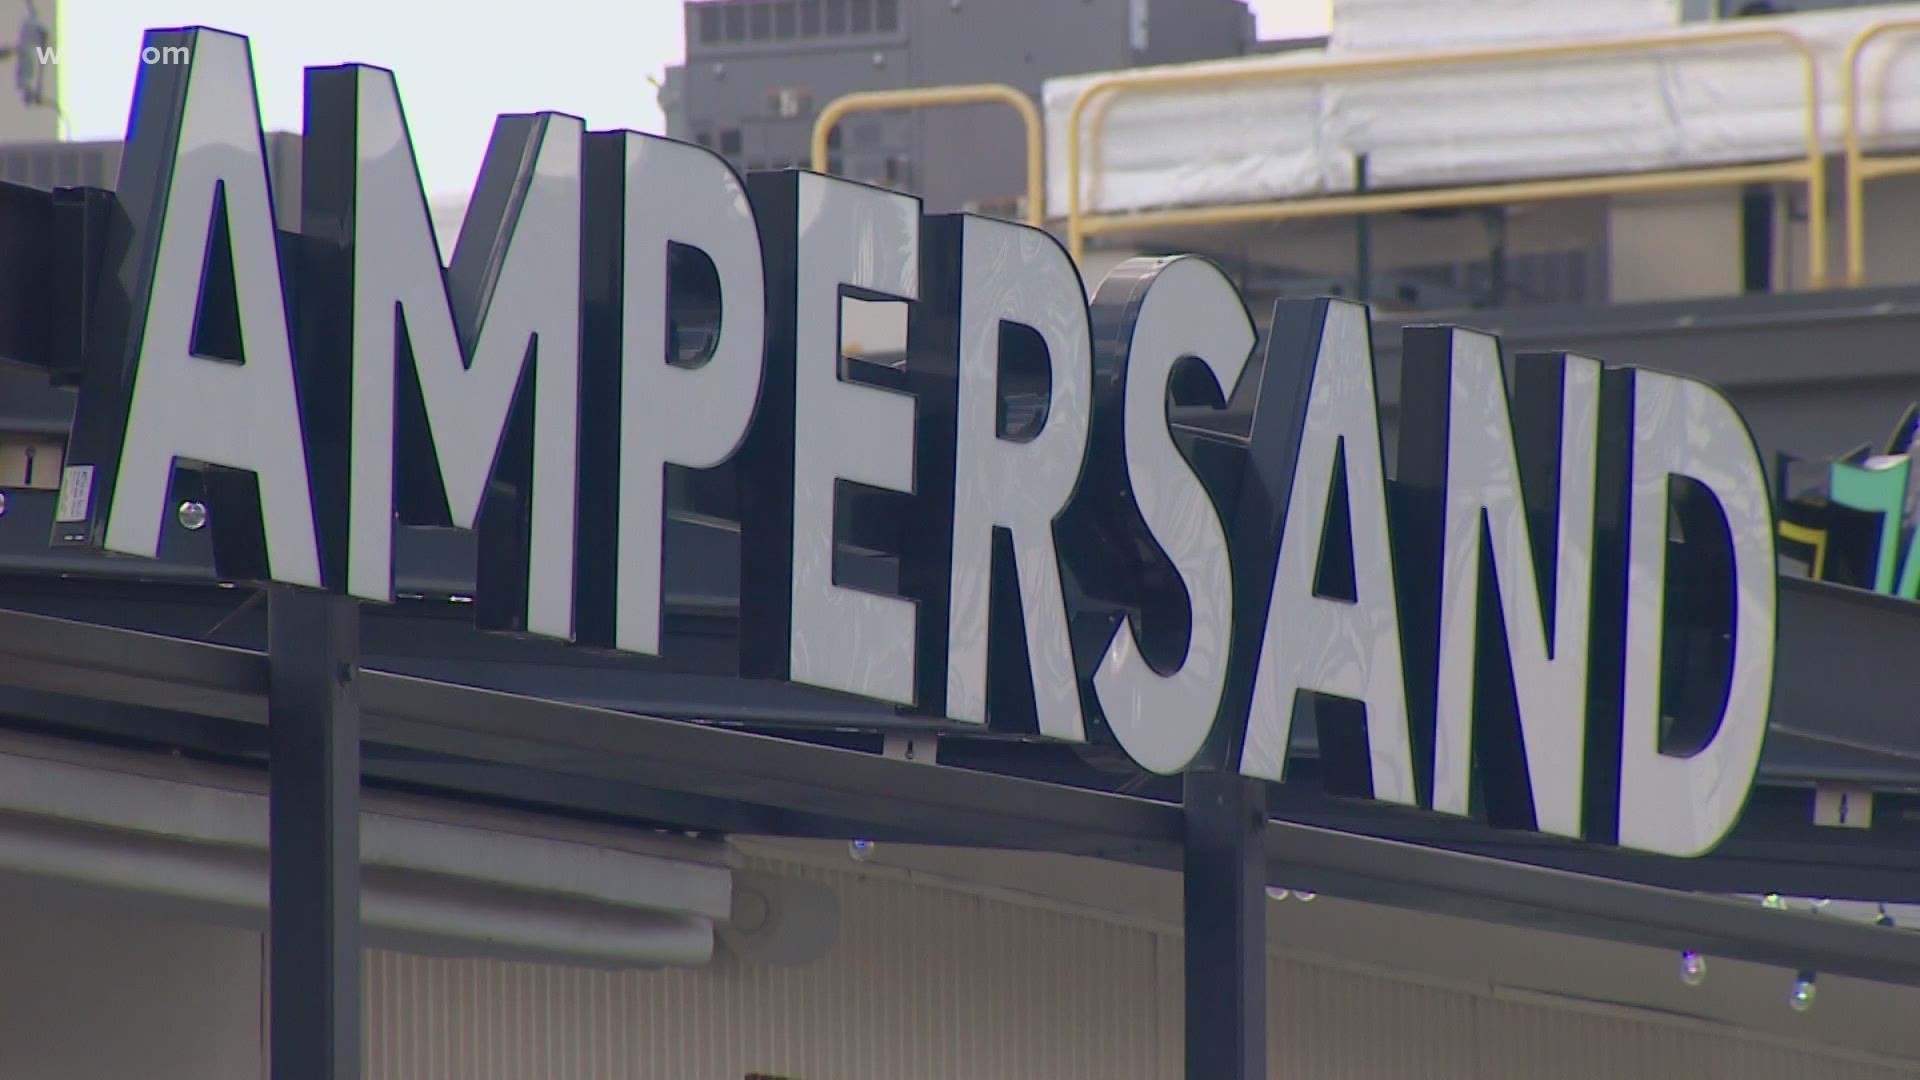 Ampersand in Fort Worth and the Whippersnapper in Dallas both lost their liquor licenses for 30 days, according to the Texas Alcoholic Beverage Commission.